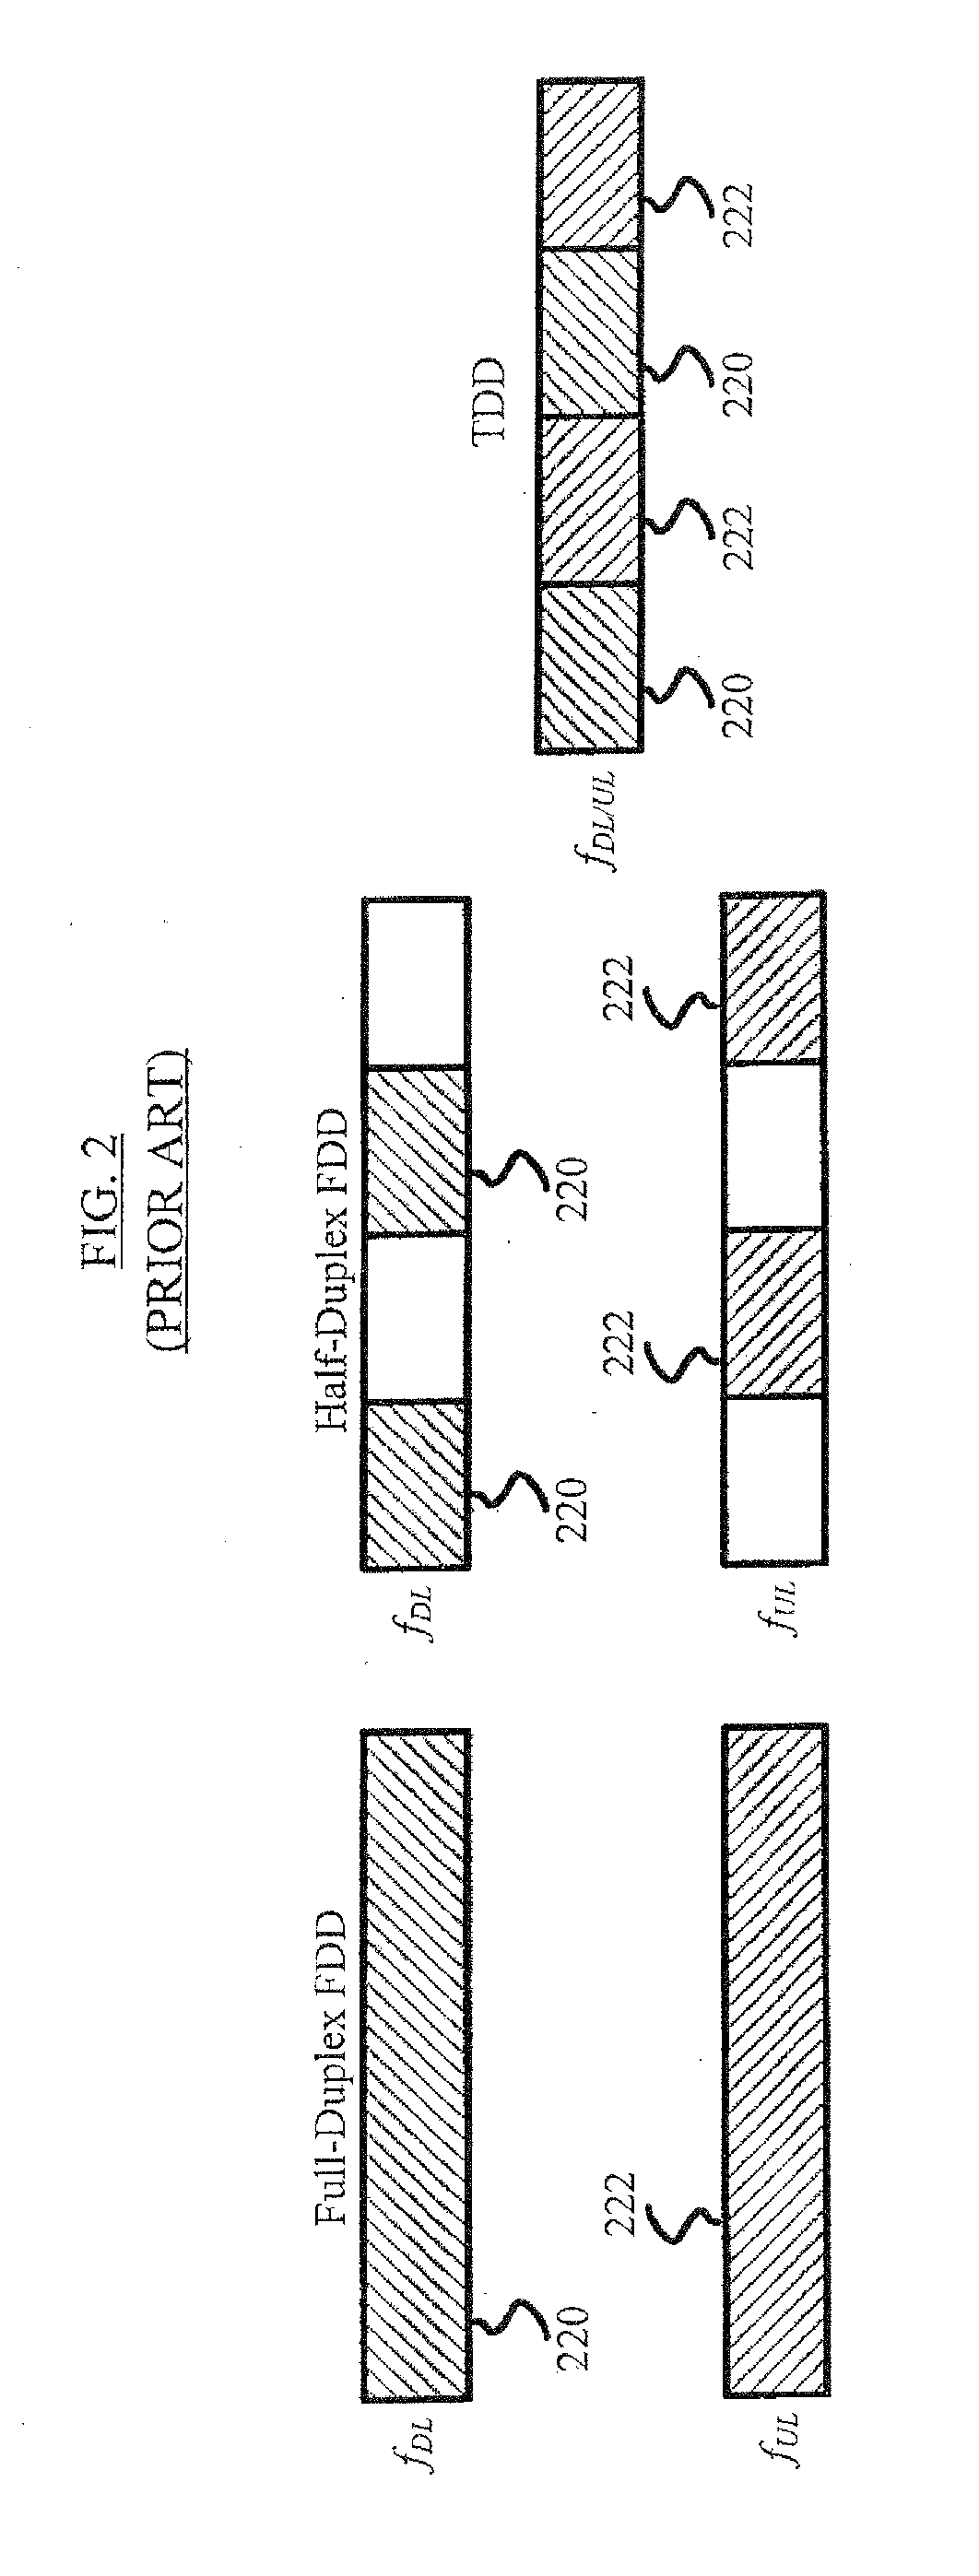 Methods and Apparatus for Optimizing Paging Mechanisms and Publication of Dynamic Paging Mechanisms